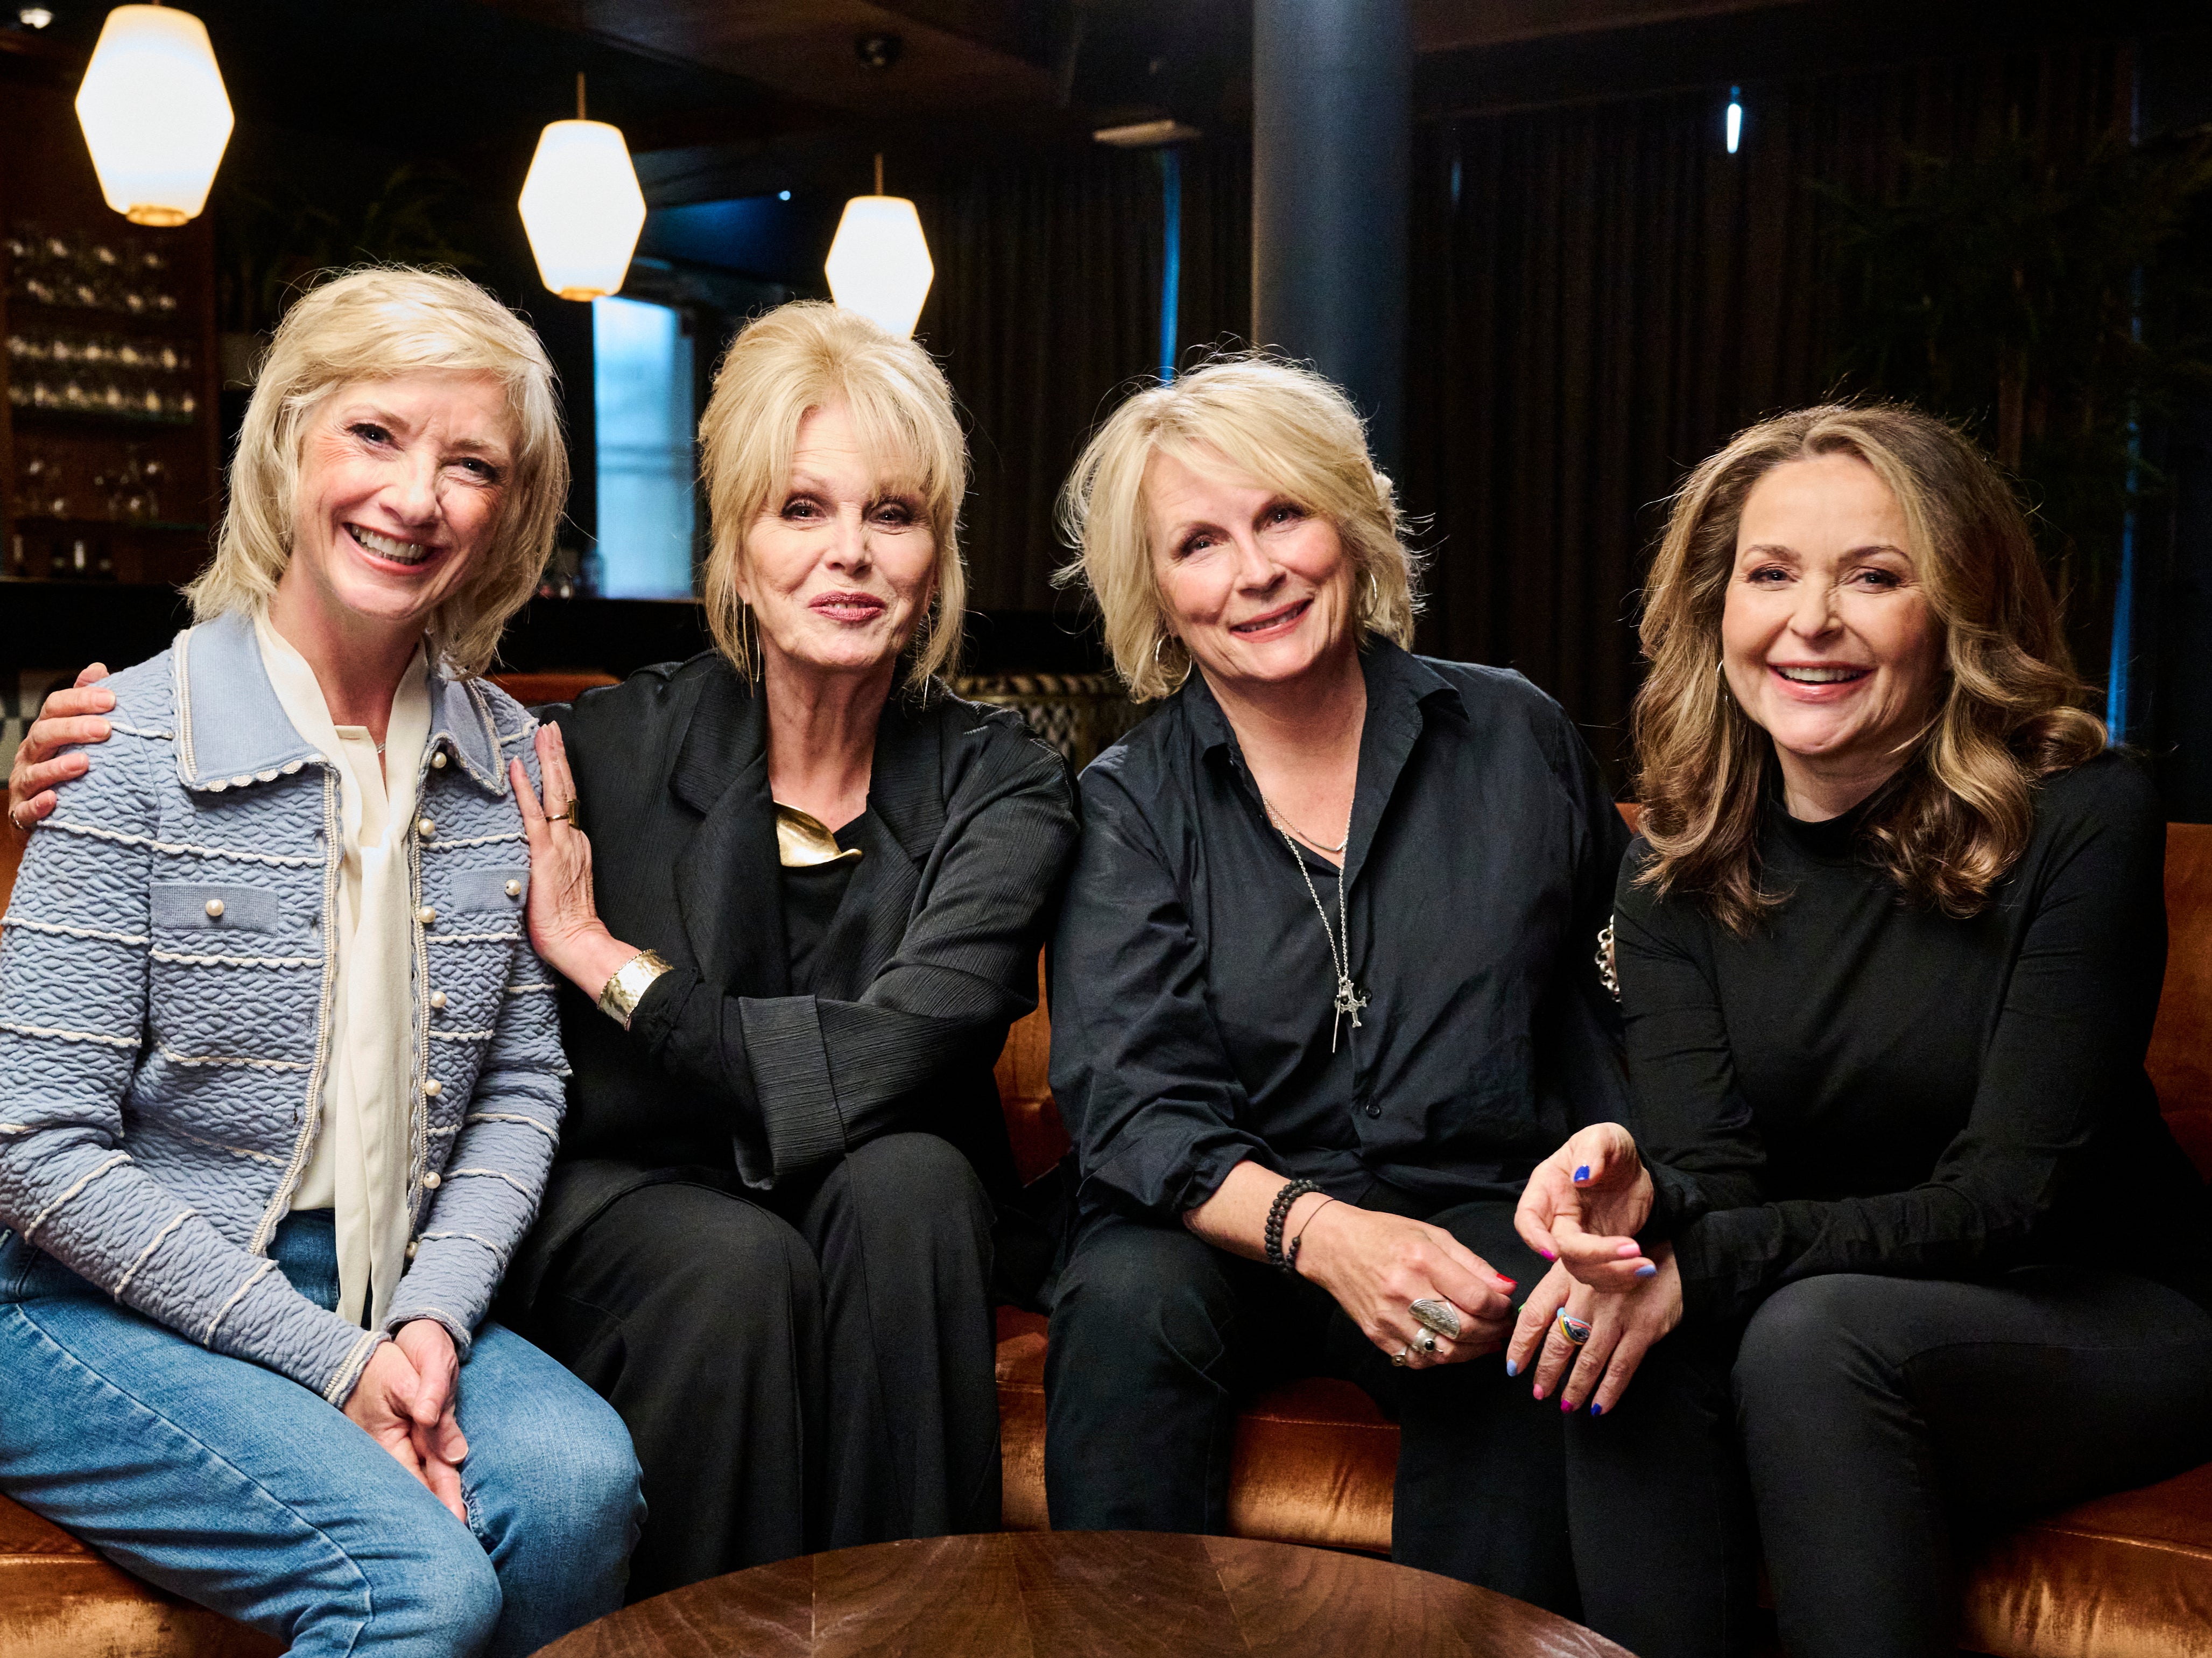 ‘Absolutely Fabulous’ cast have reunited for one-off special